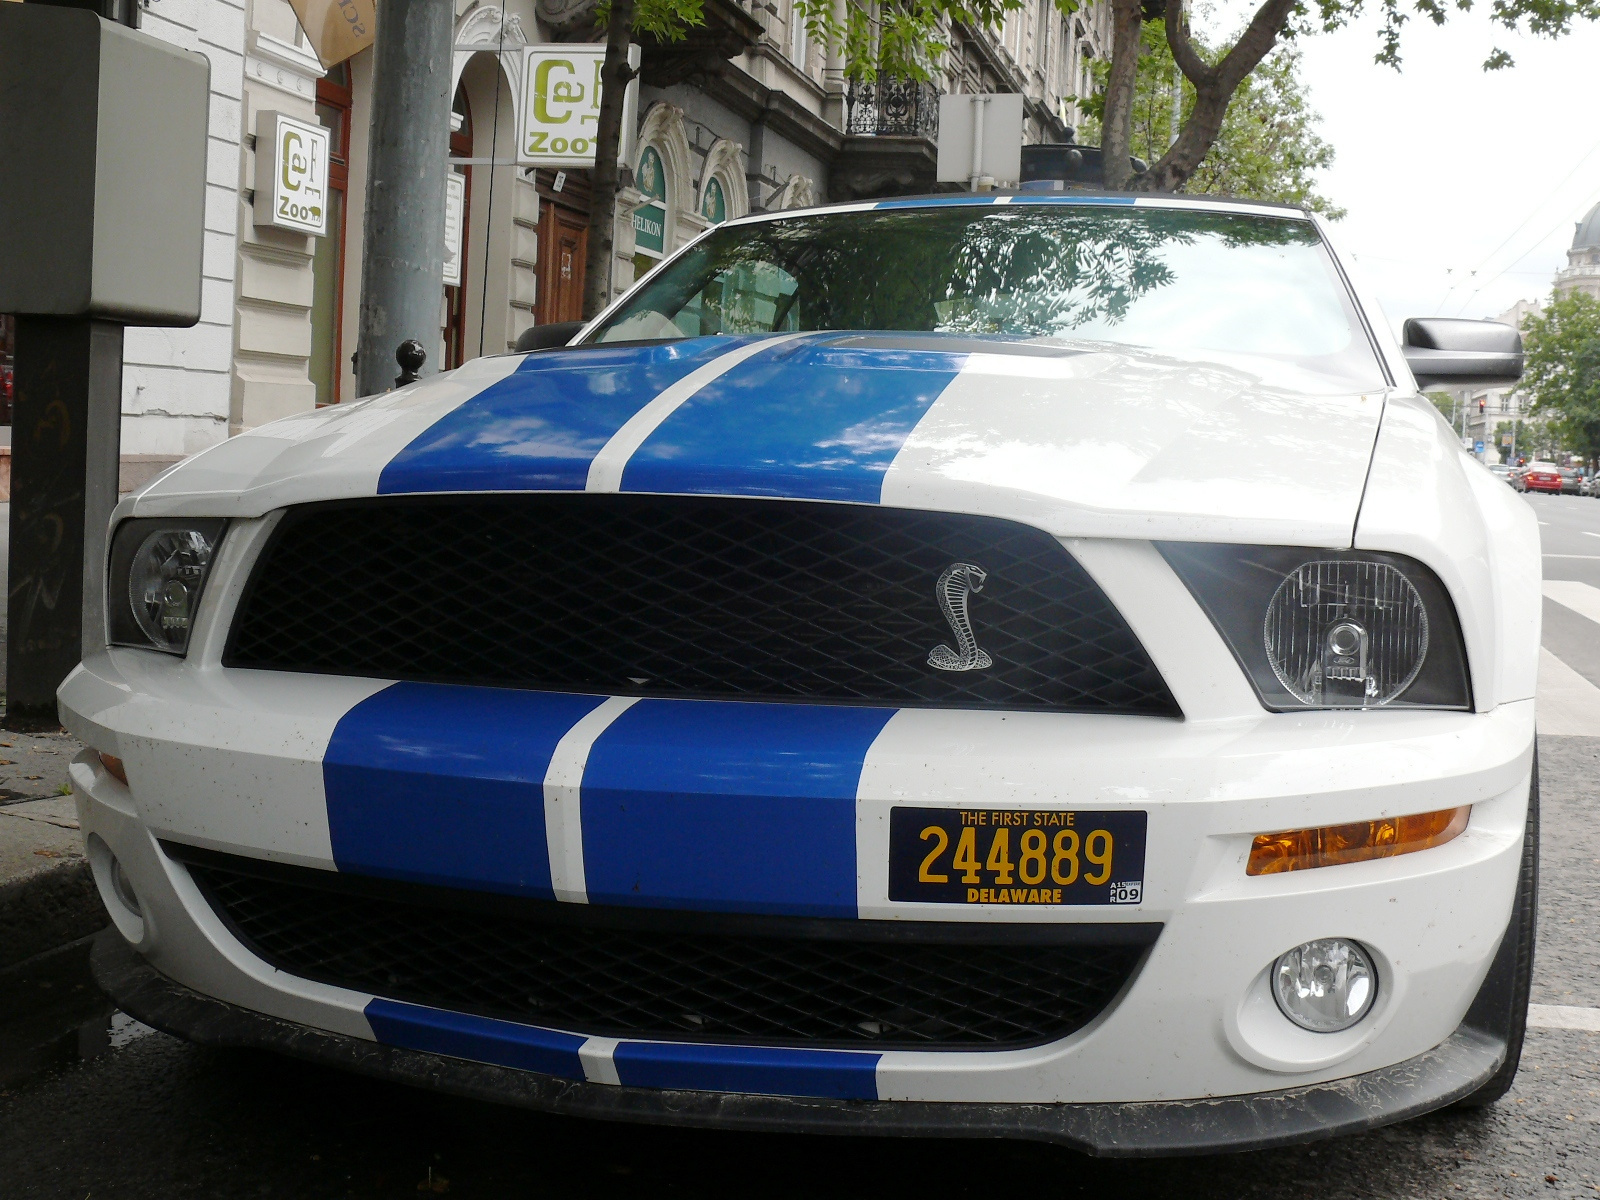 Shelby Mustang GT 500 Convertible